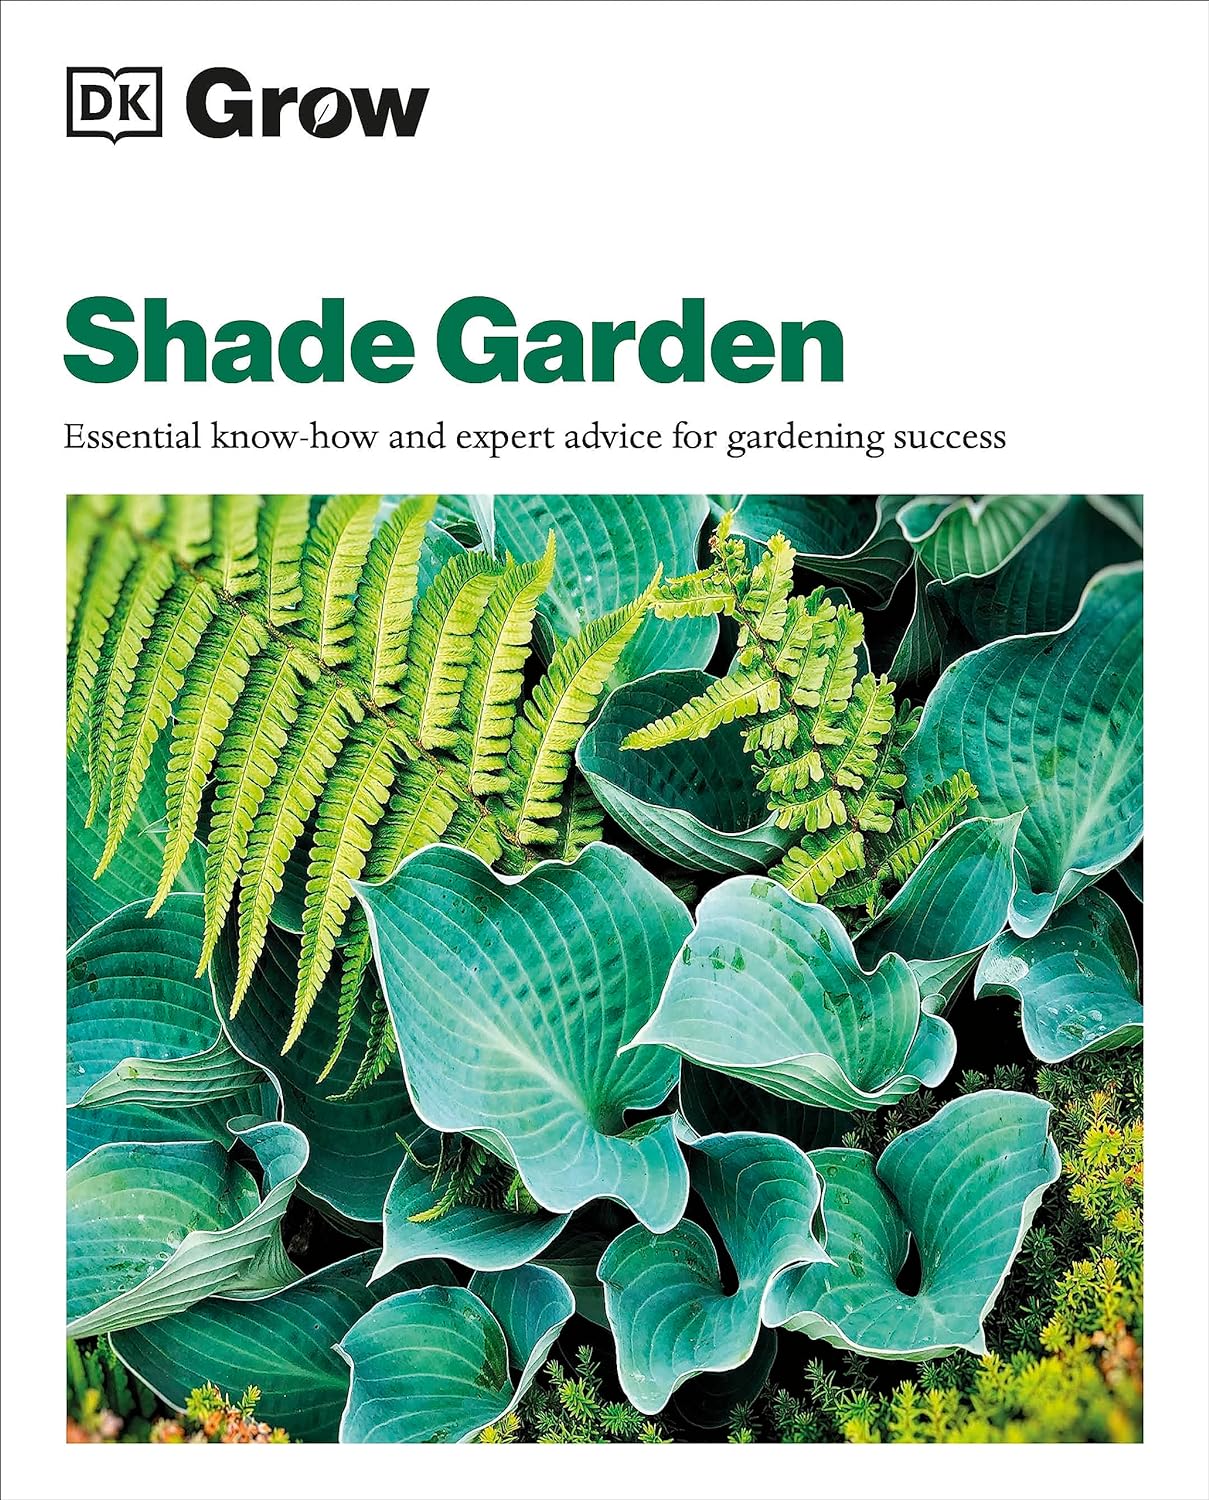 SHADE GARDEN: ESSENTIAL KNOW-HOW AND EXPERT ADVICE FOR GARDENING SUCCESS (DK GROW)